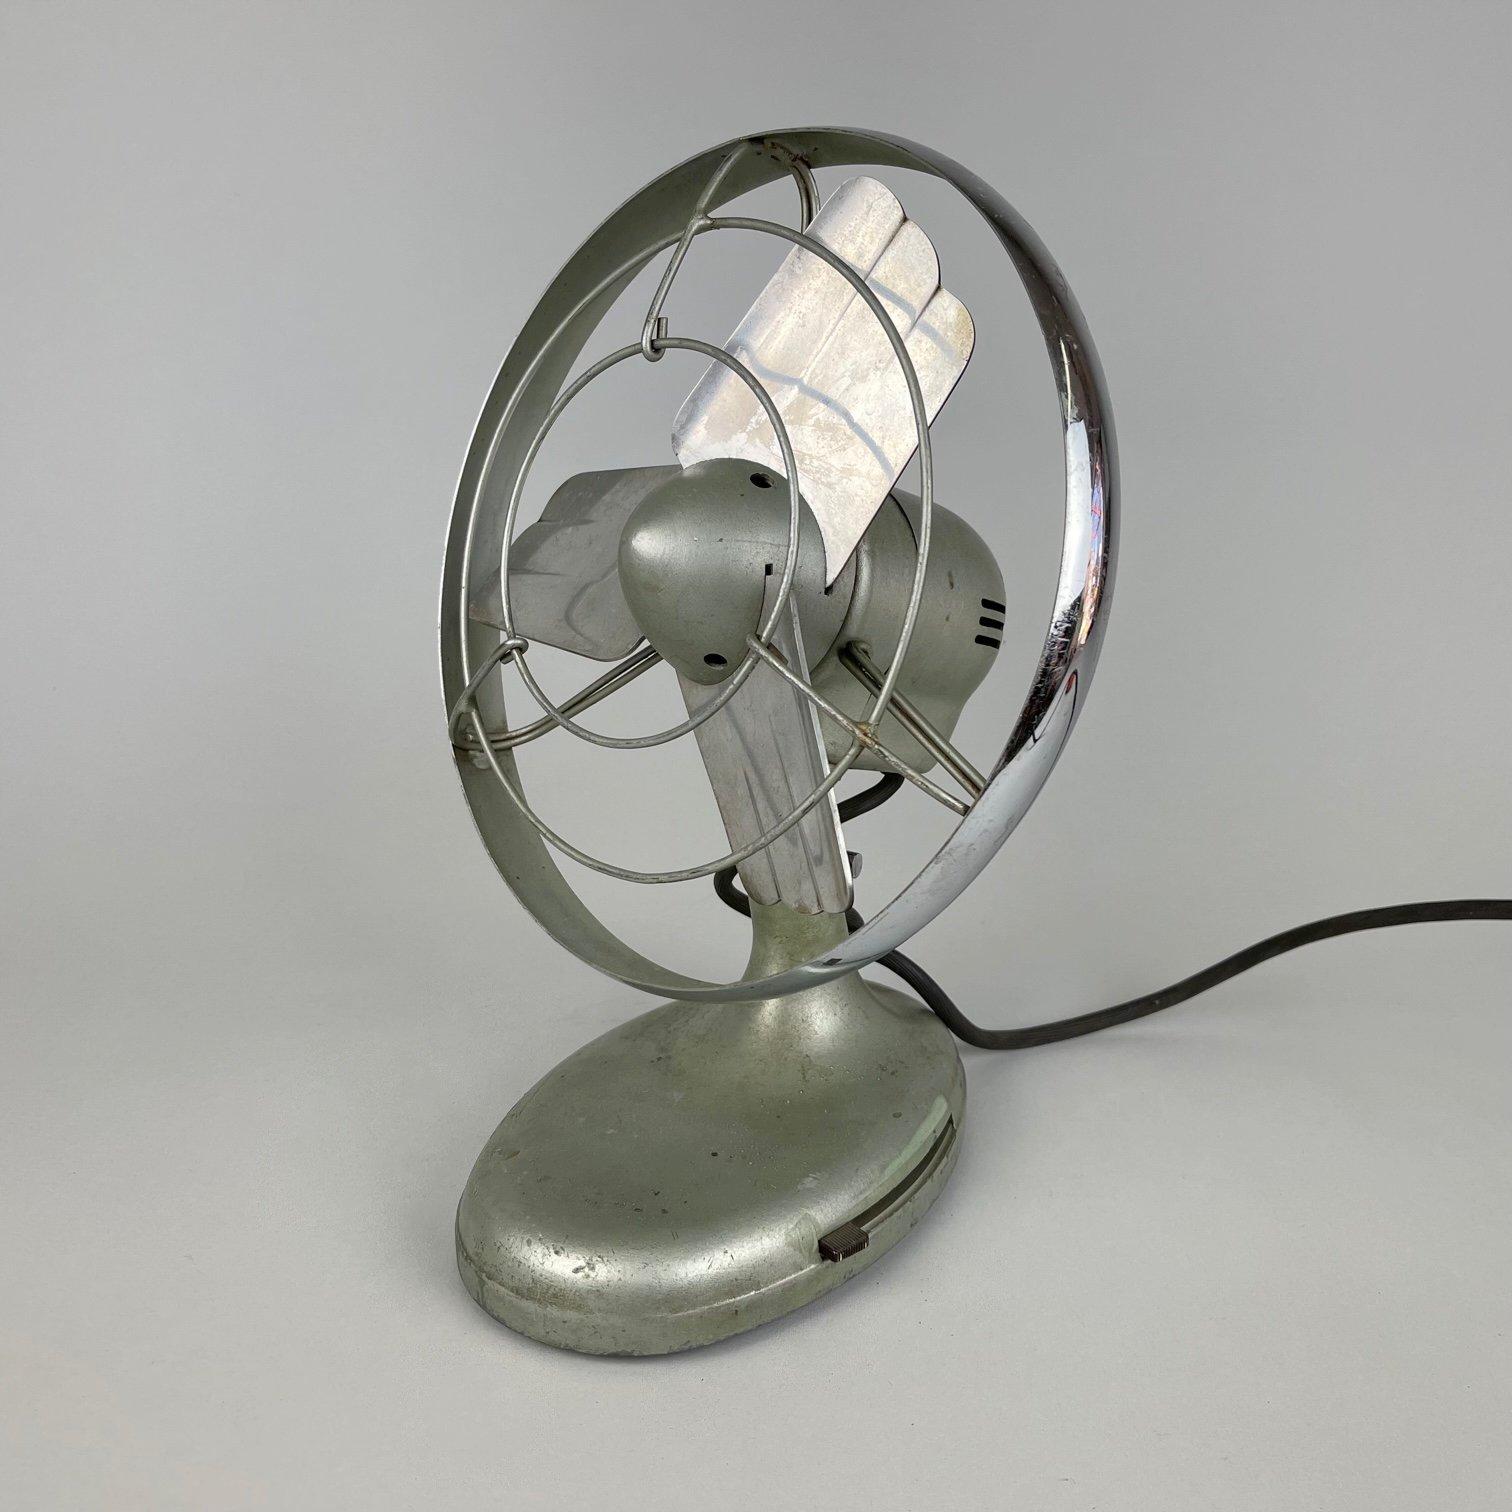 Very nice vintage, industrial table fan from former Czechoslovakia. Made in the 1950's. Fully functional.